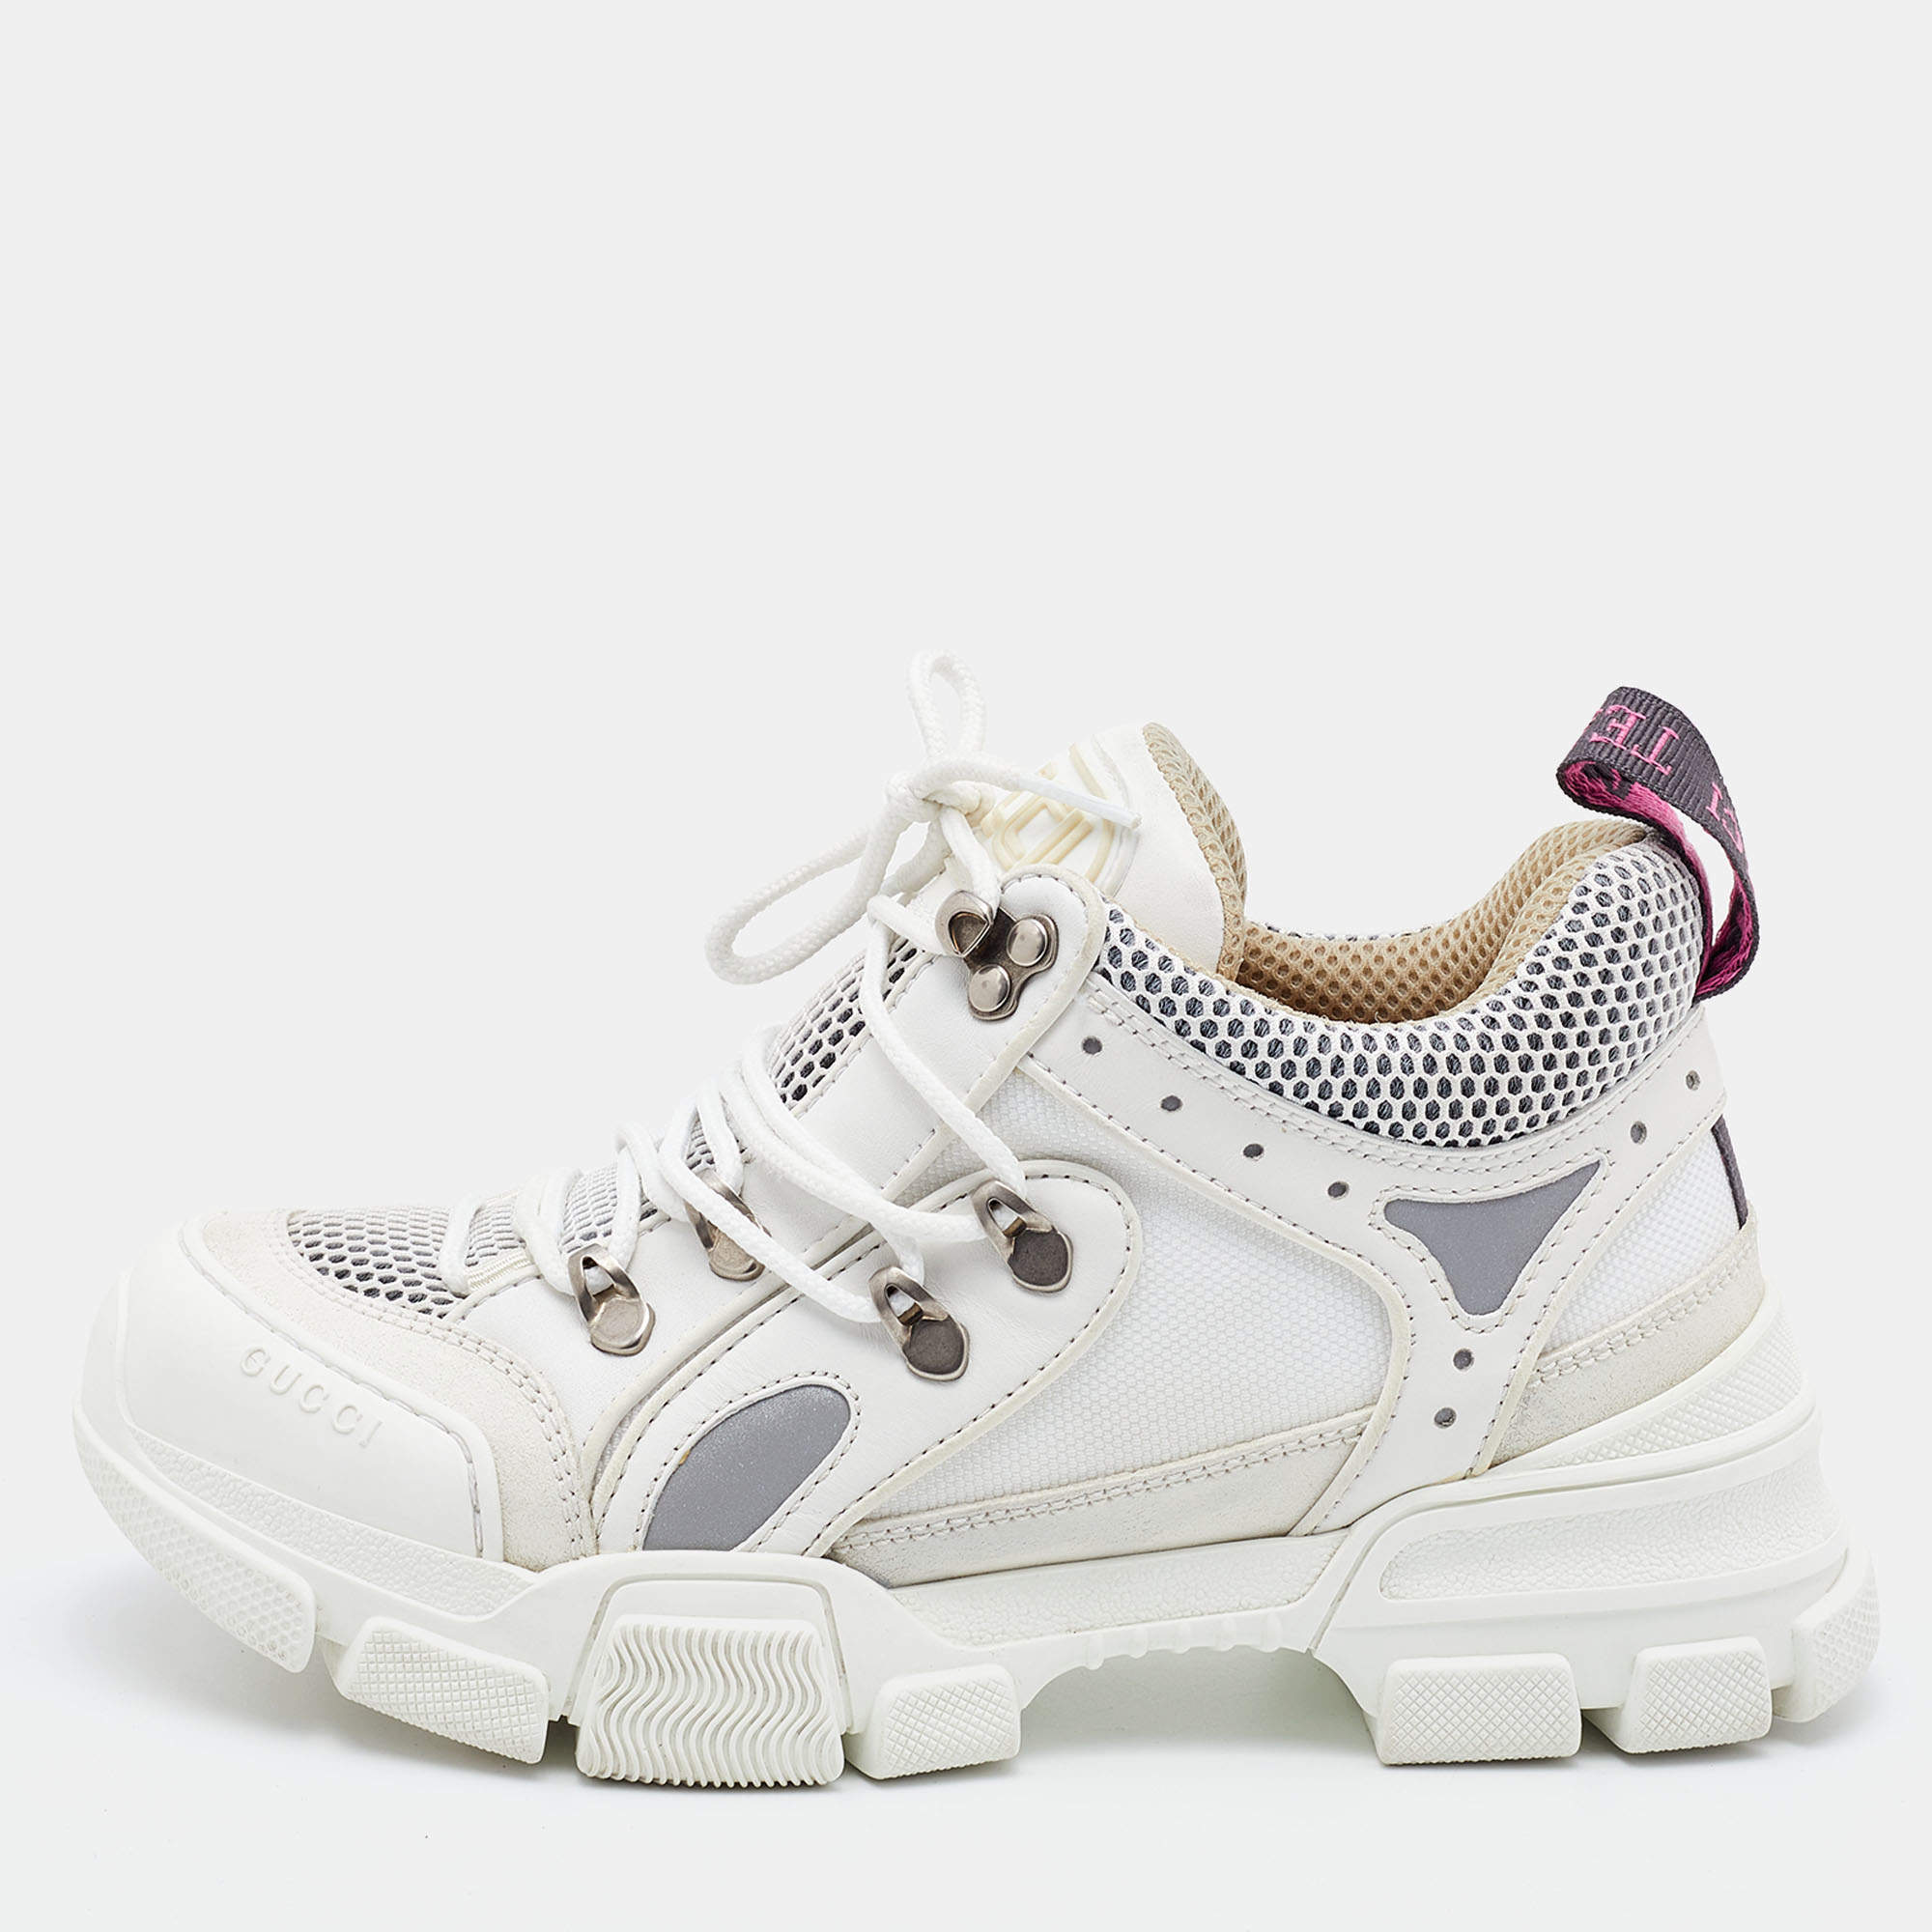 Gucci White/Cream Mesh and Leather Sneakers Size 37 |